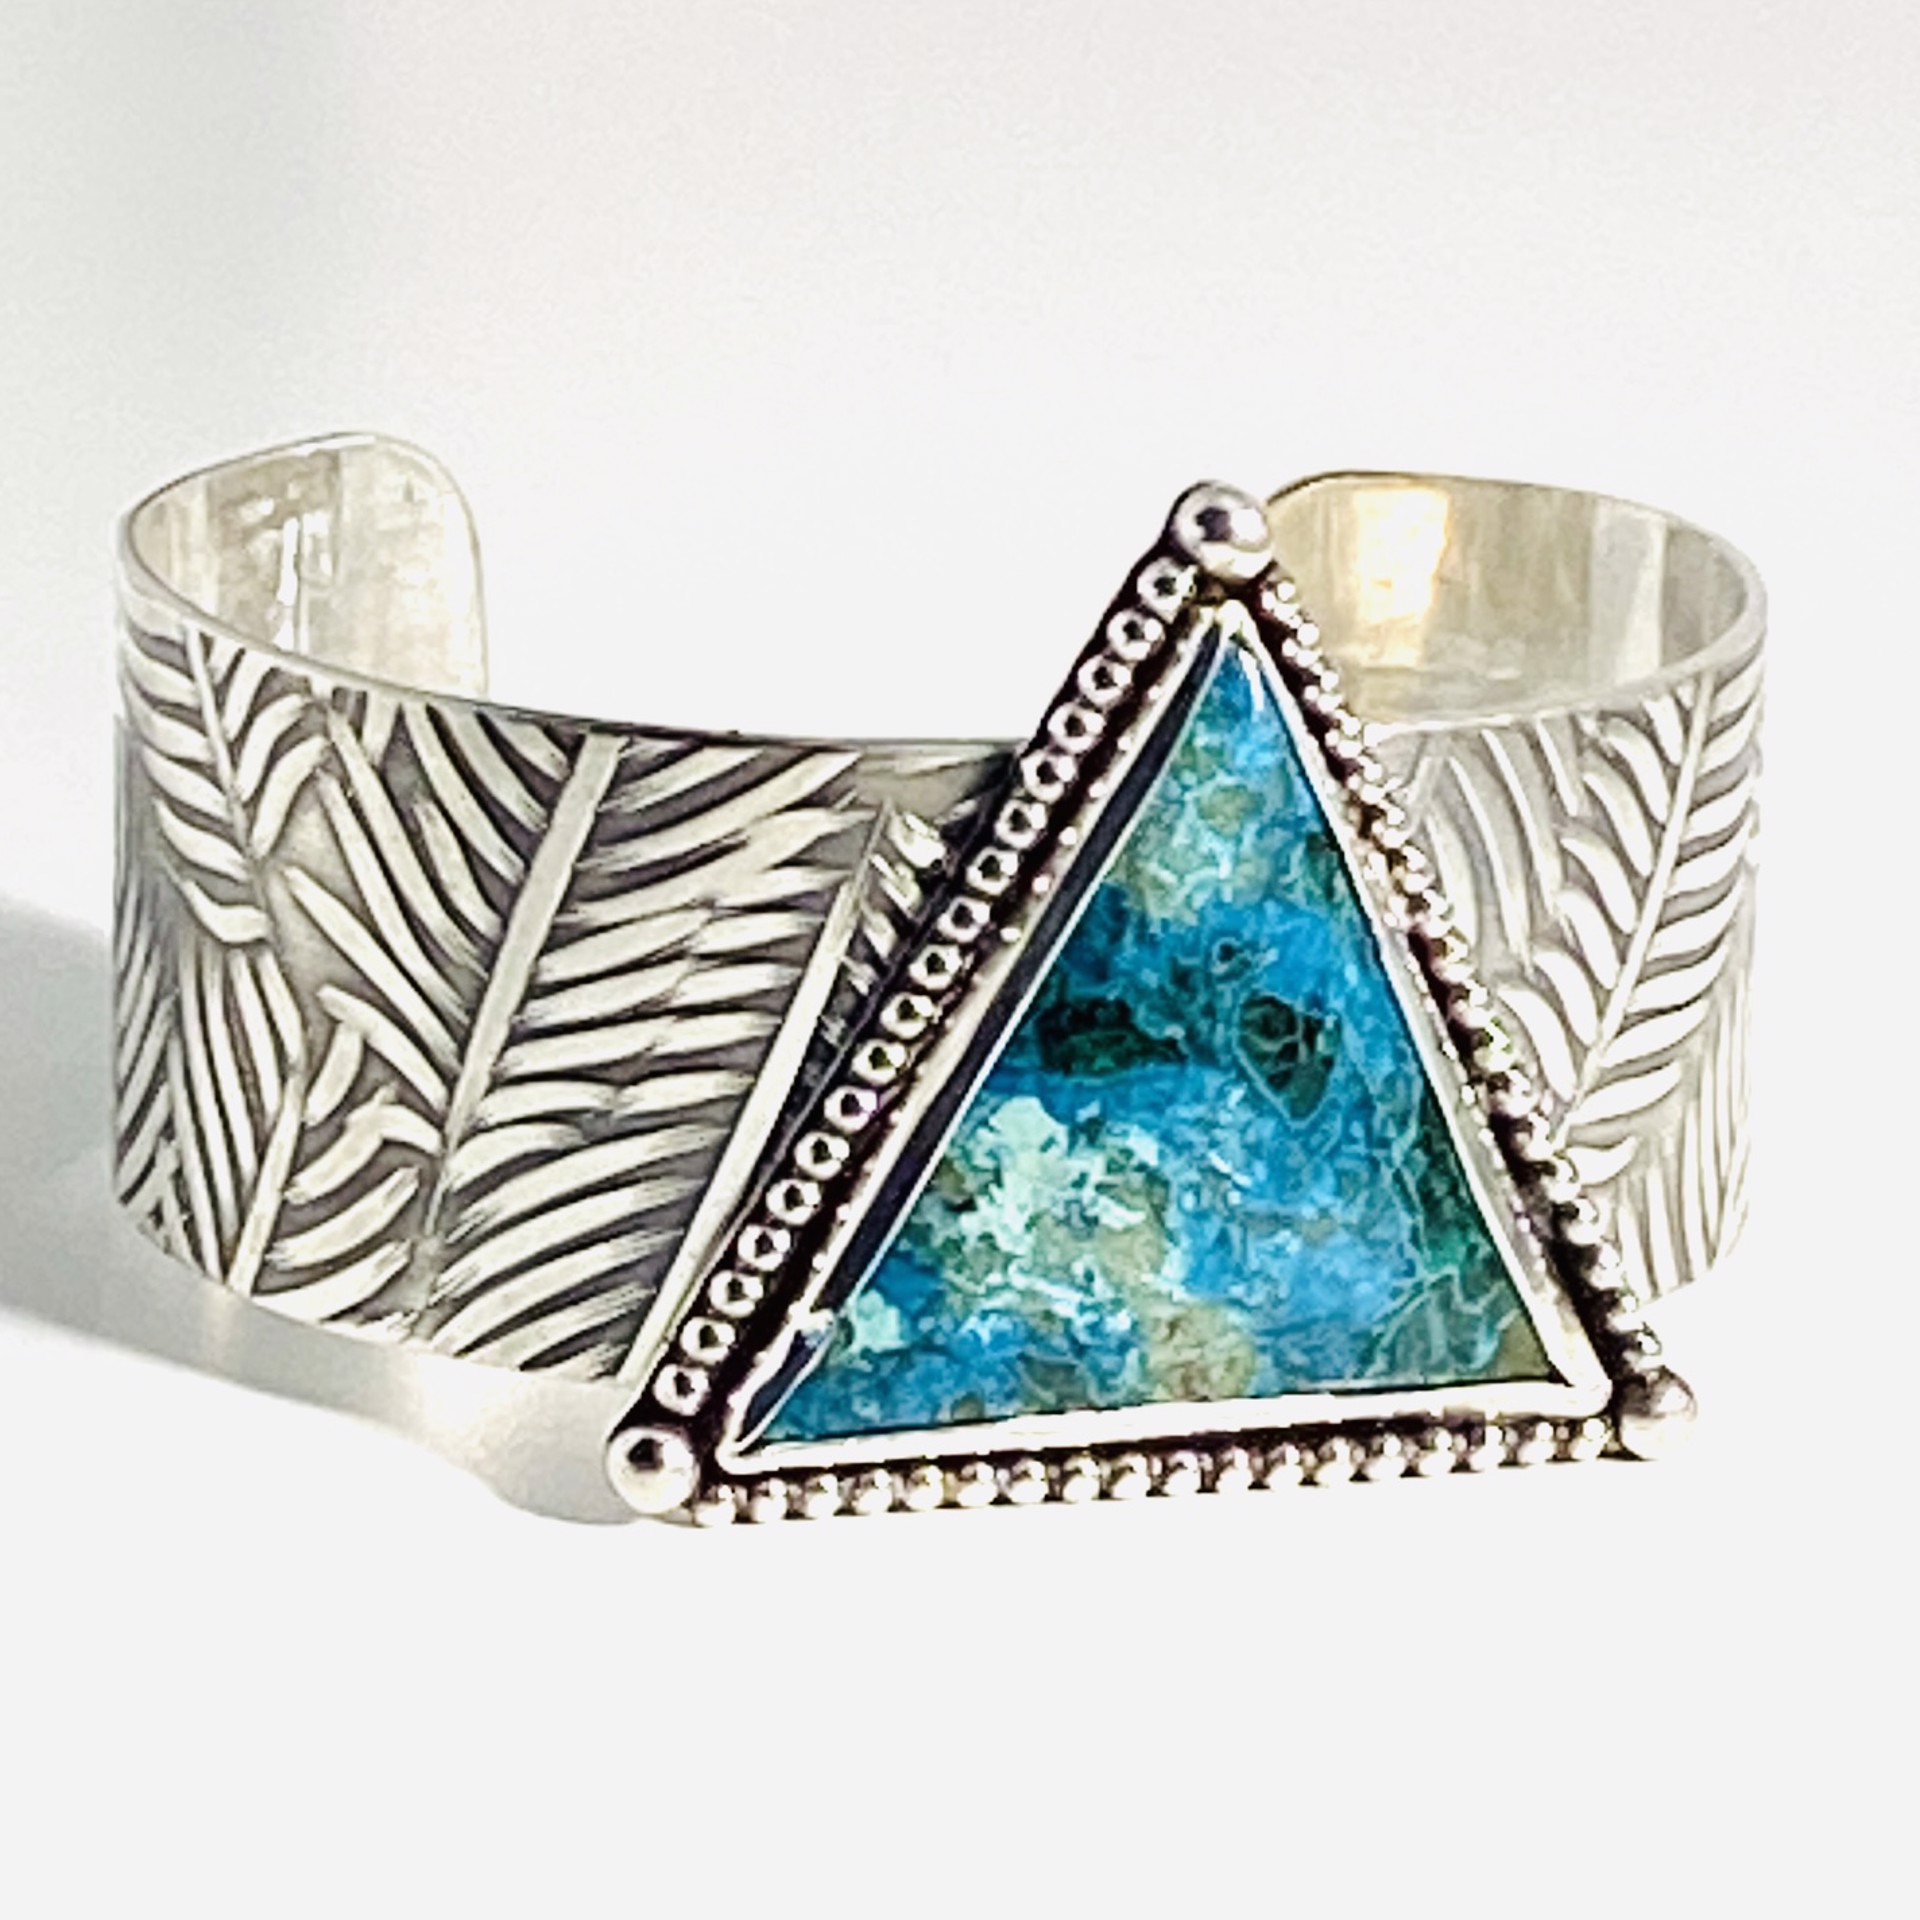 Sterling Leaf Design Large Triangle Shattuckite with bead bezel Cuff Bracelet AB23-32 by Anne Bivens